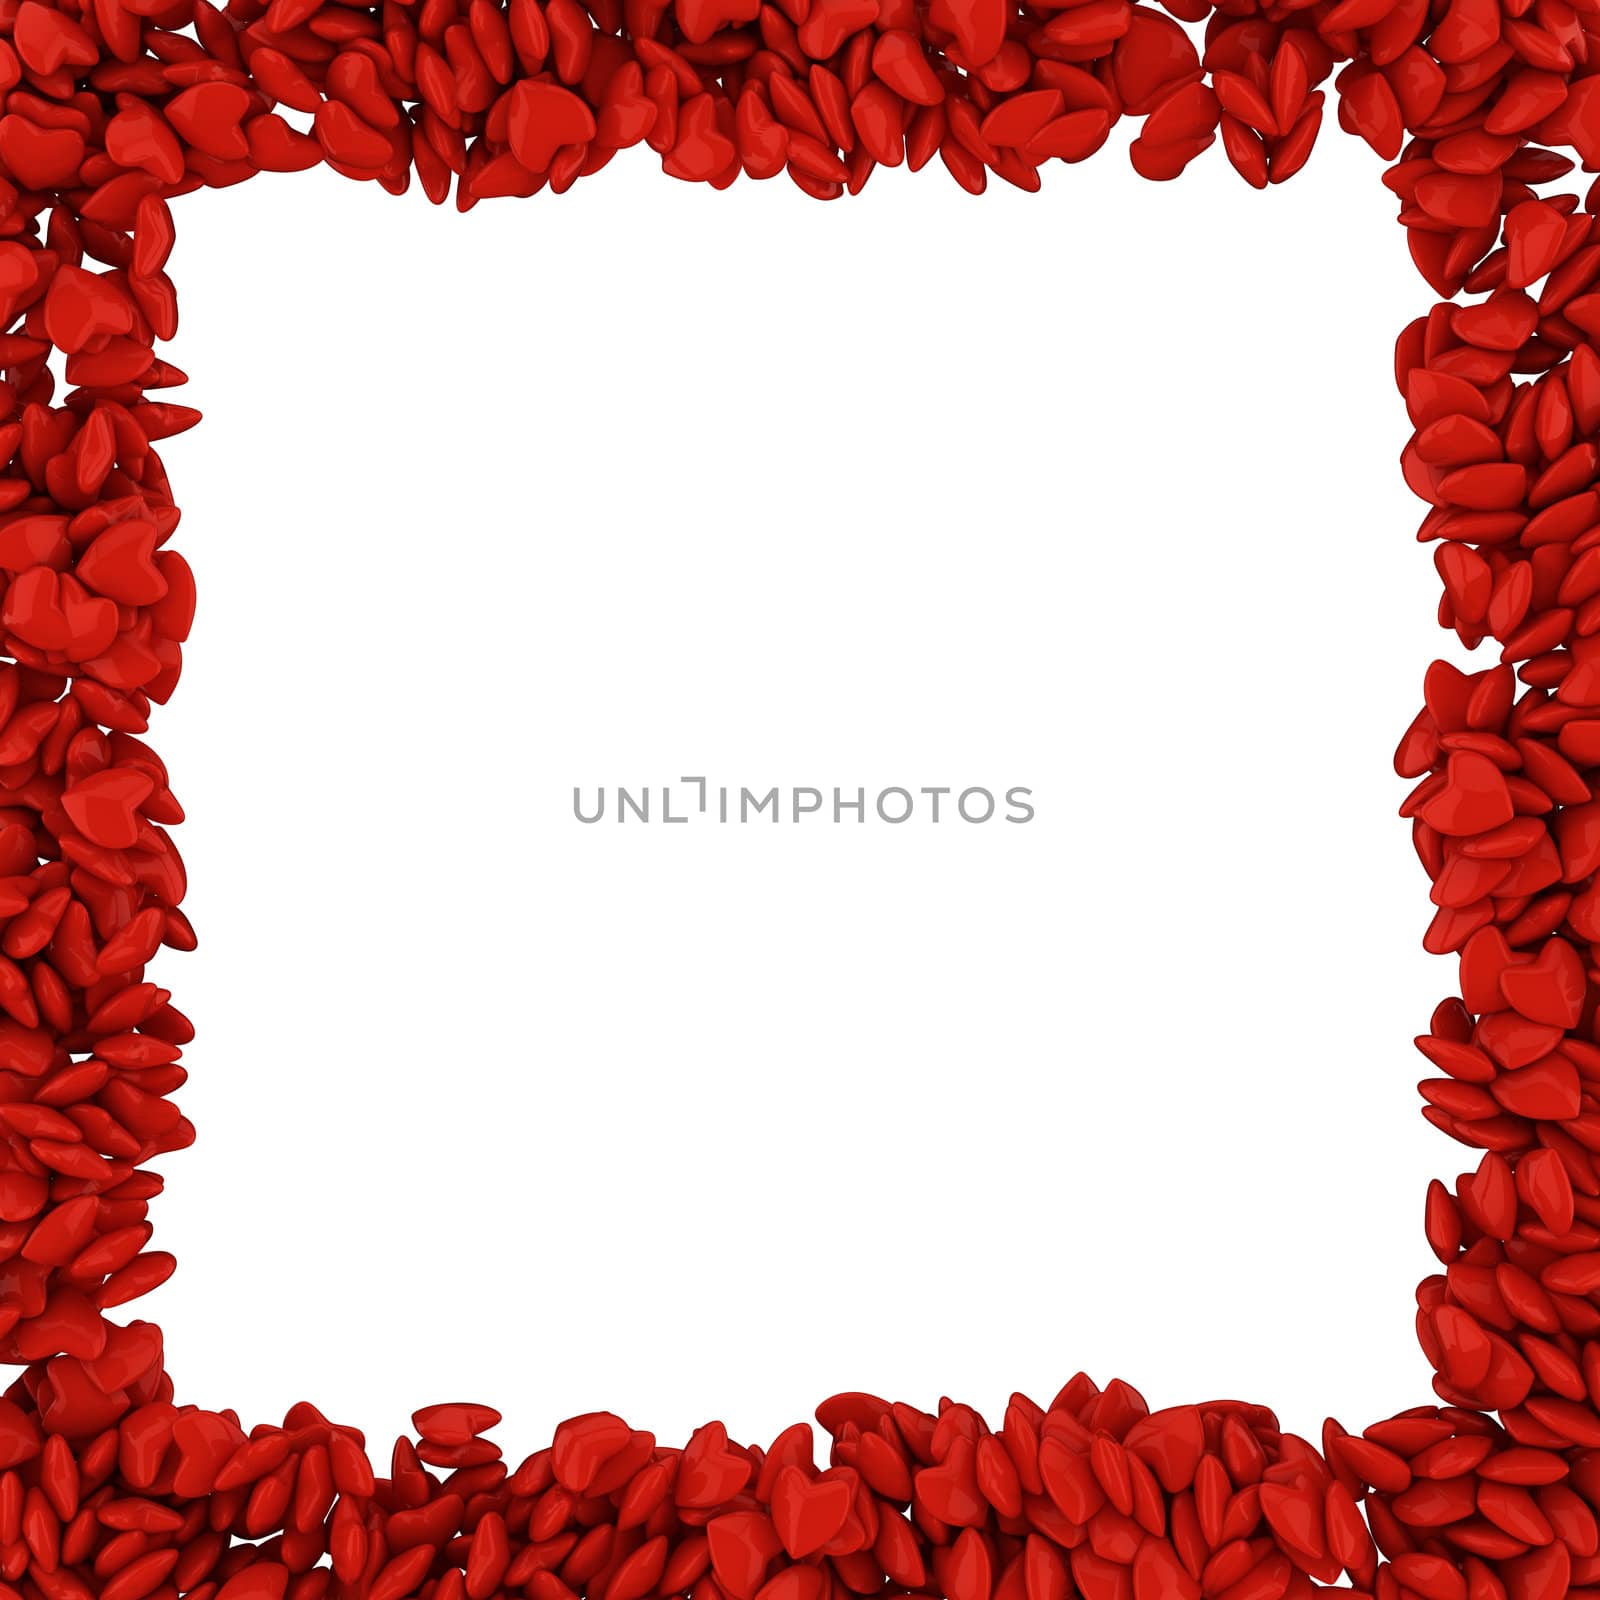 Square frame made of small red hearts, 3d